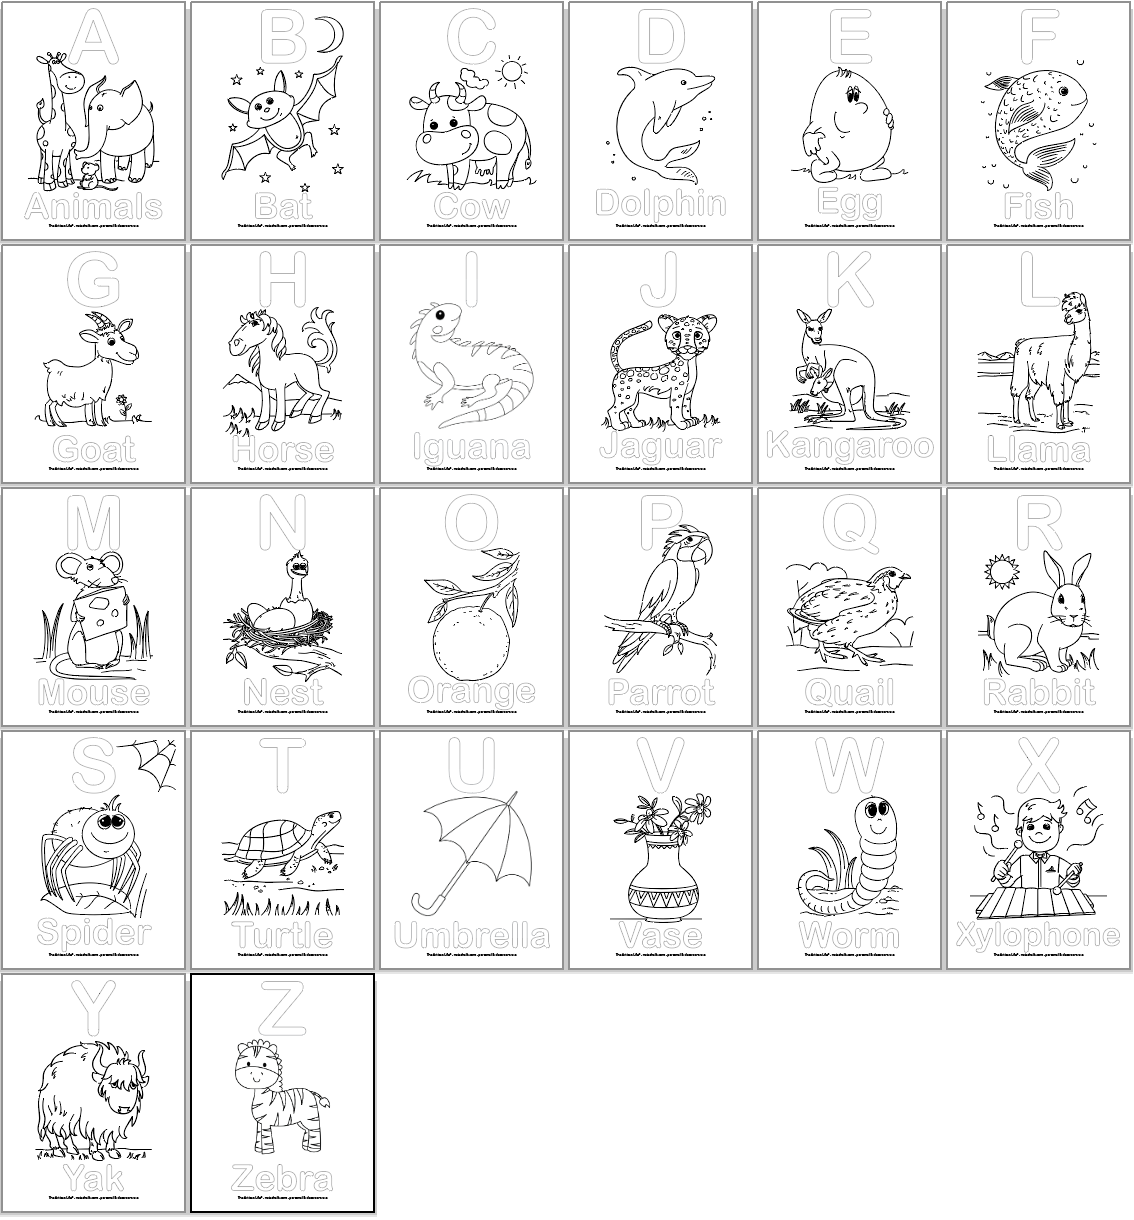 Alphabet coloring pages for preschool â the artisan life